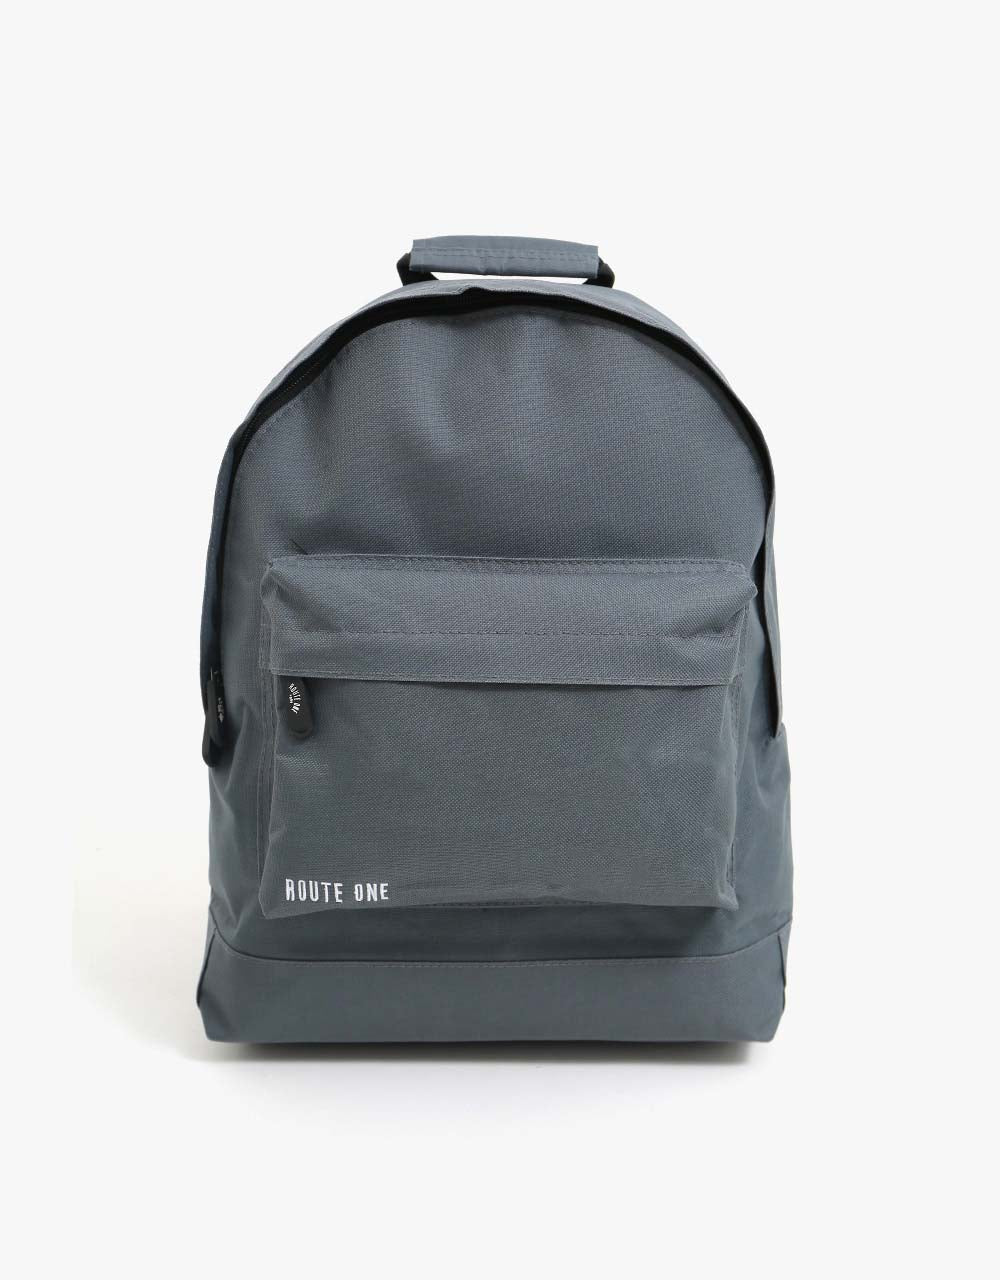 Route One Backpack - Charcoal